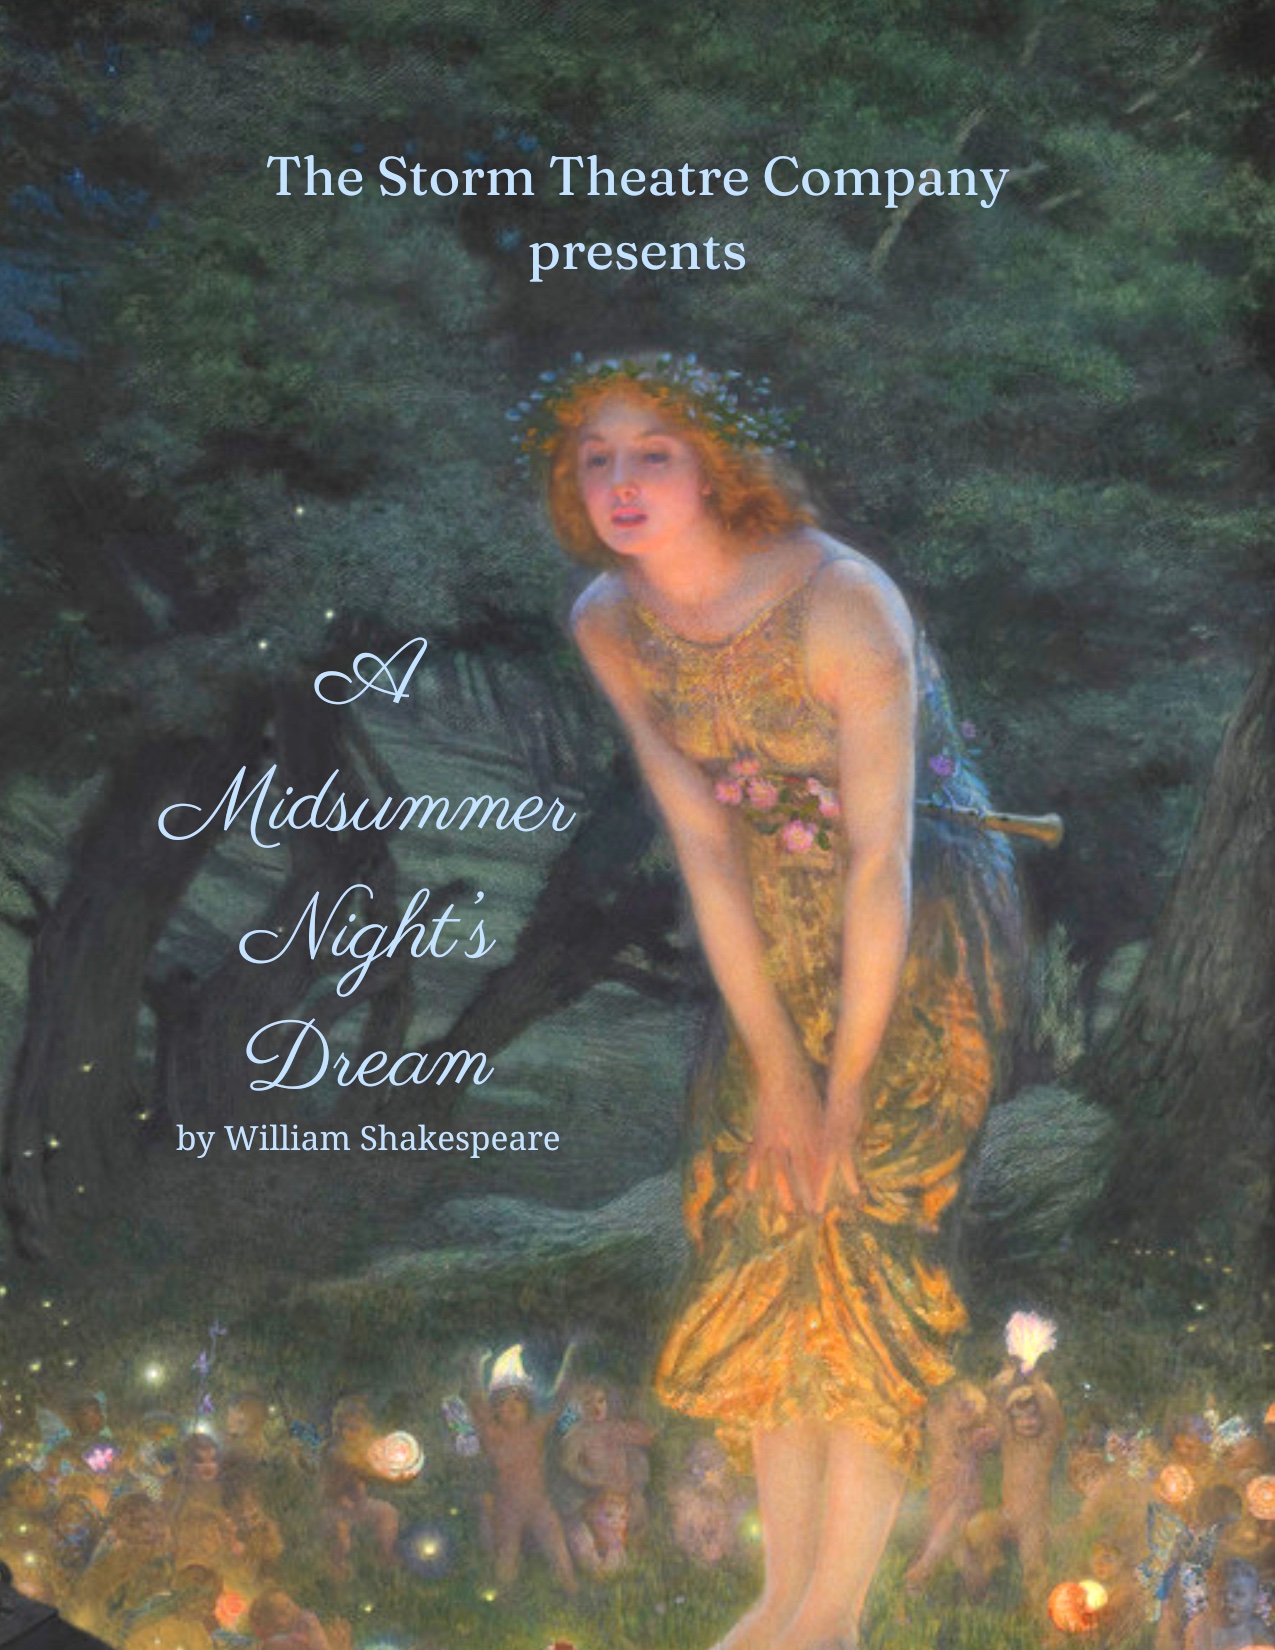 CTX3686. Auditions for A Midsummer Night's Dream, by The Storm Theatre Company, Fredricksburg